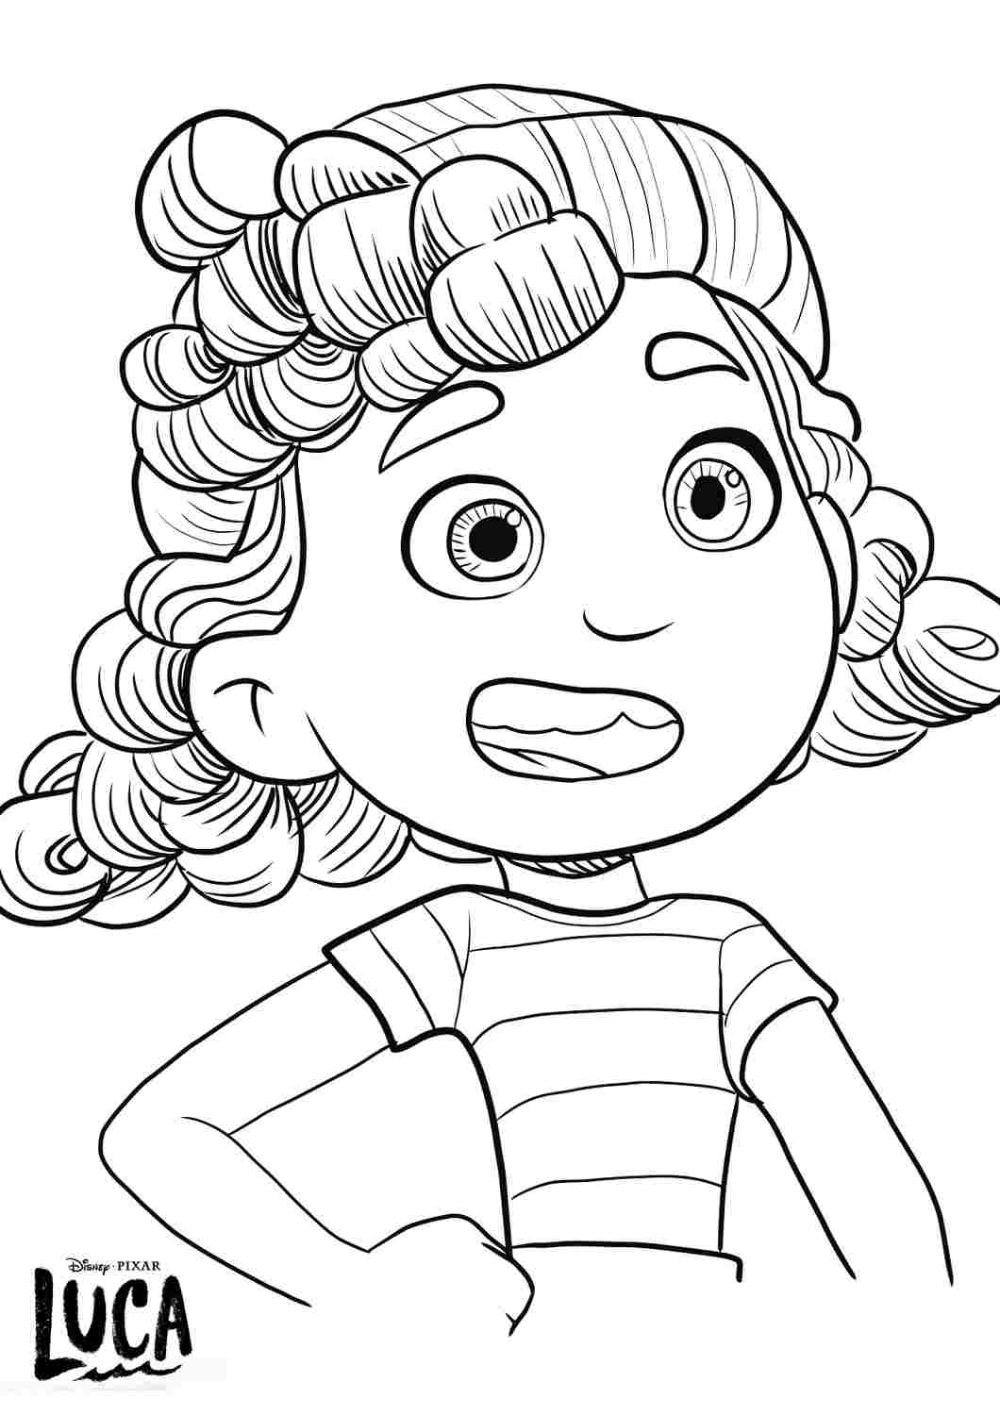 Printable Luca Coloring Pages